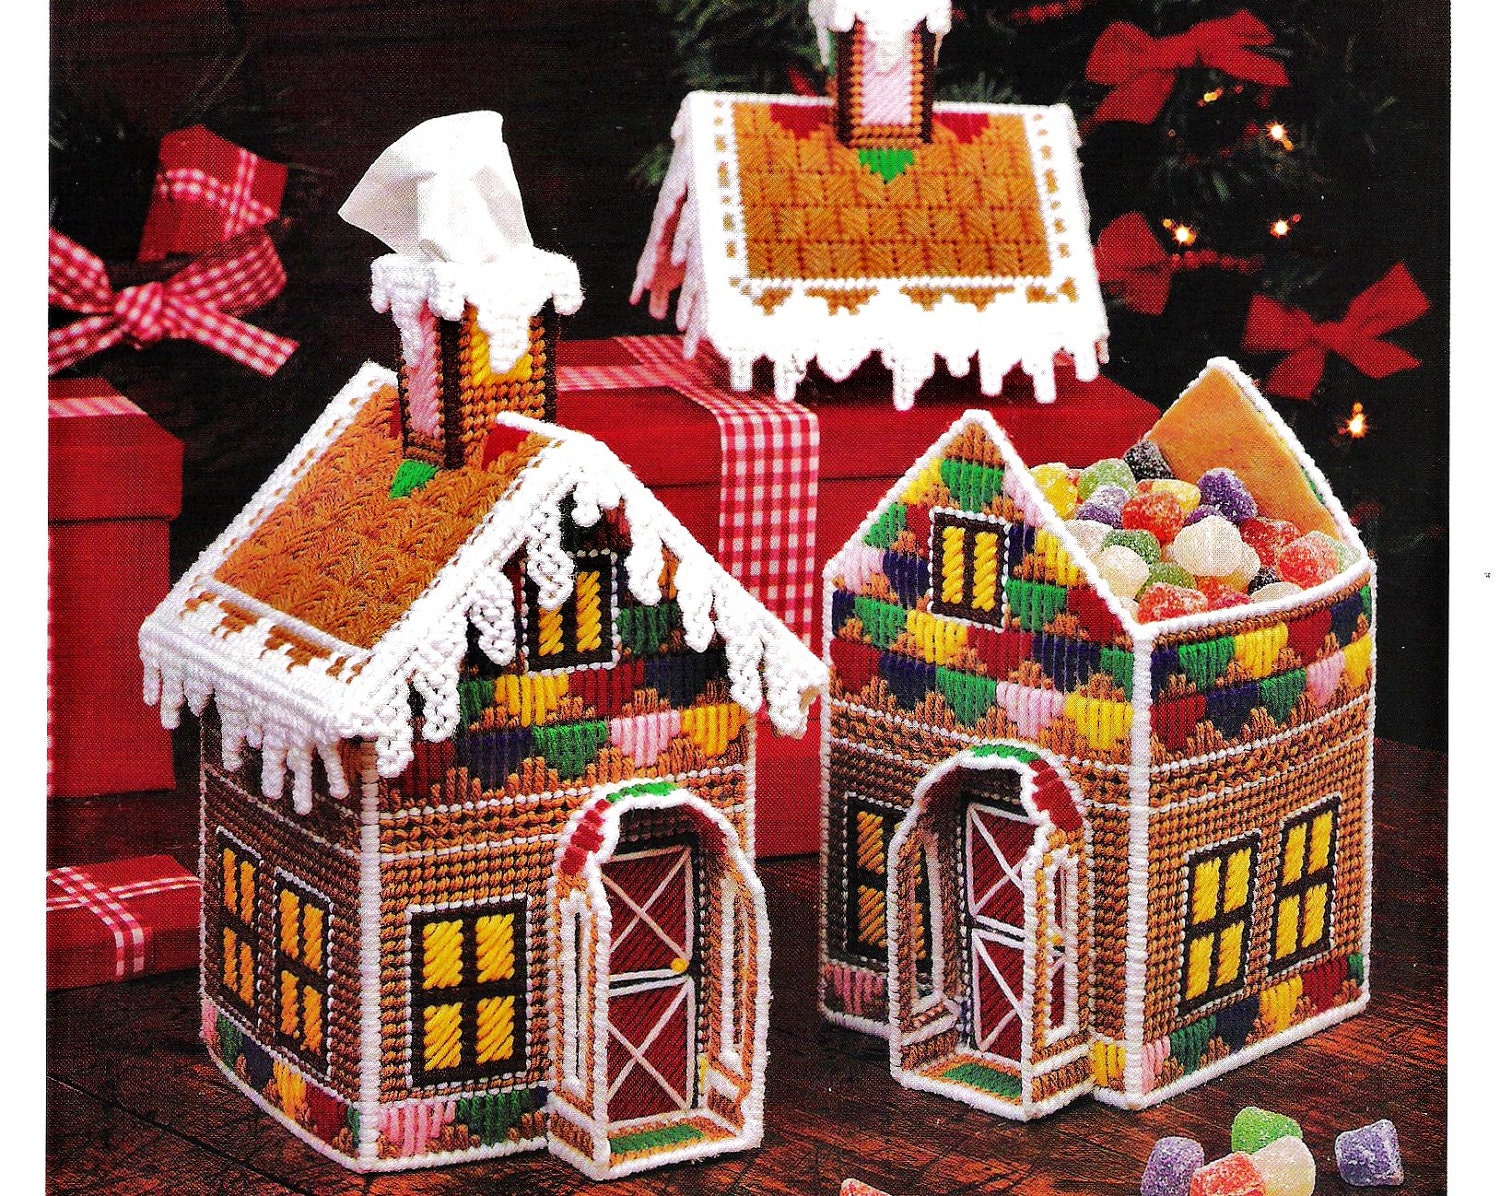 plastic-canvas-gingerbread-house-pattern-by-stitchyspot-on-etsy